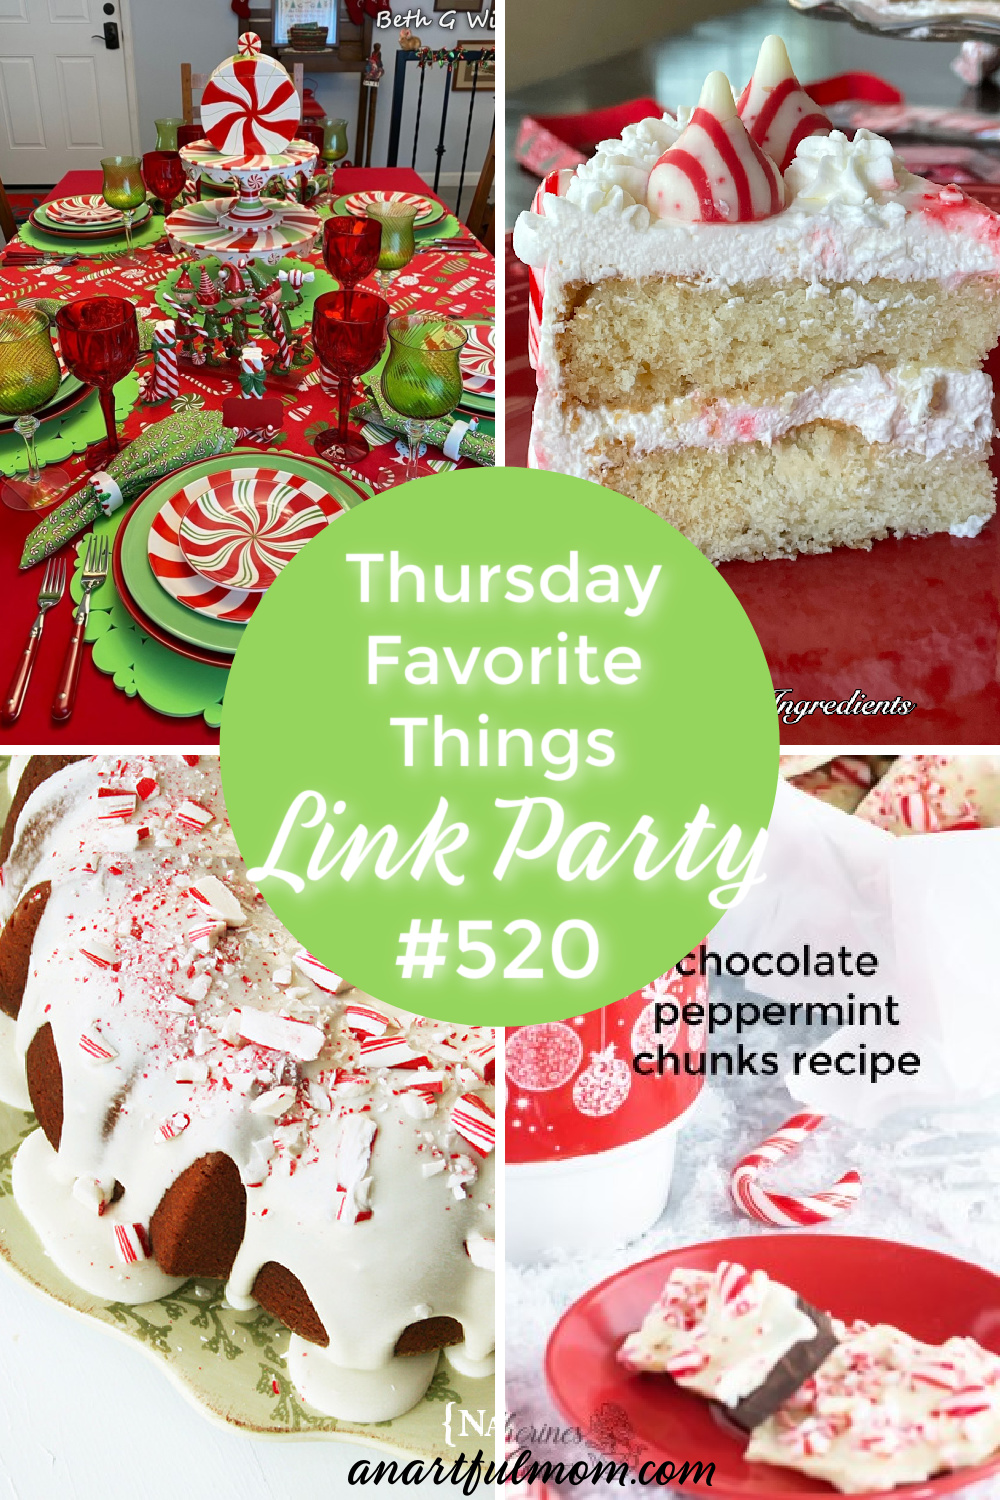 Thursday Favorite Things Link Party: Candy Canes and Peppermint